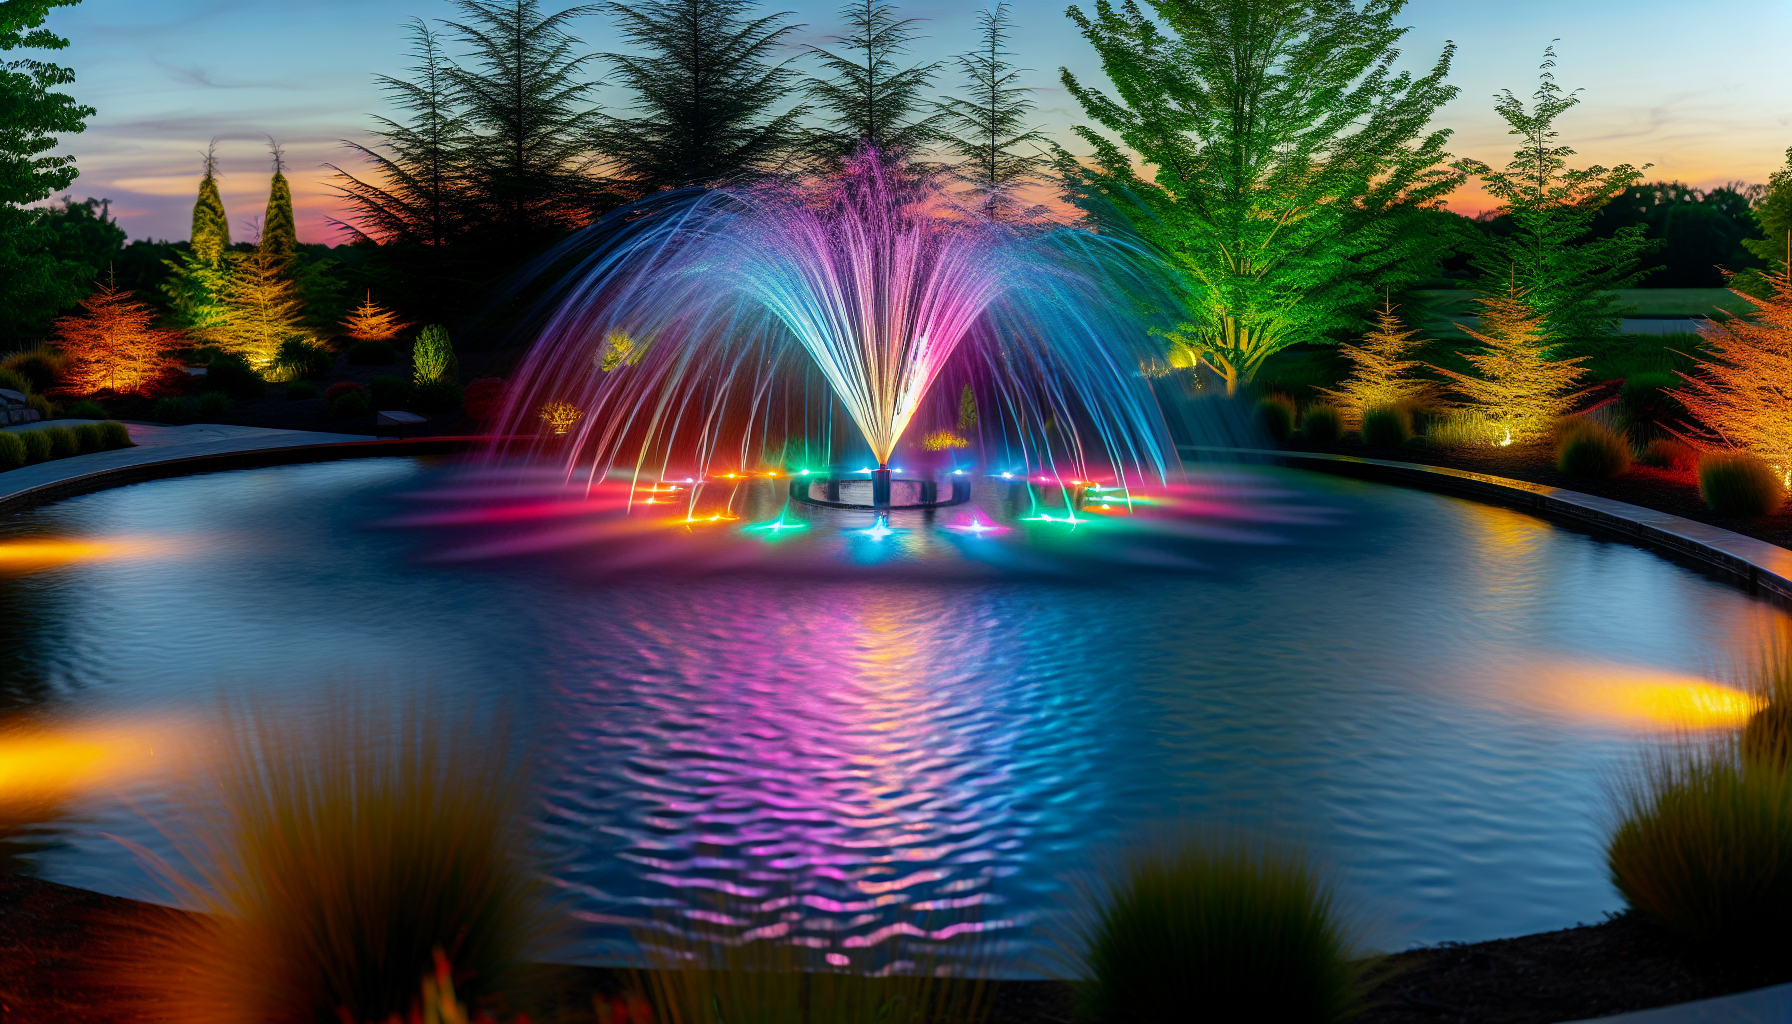 LED illuminated pond fountain in the evening